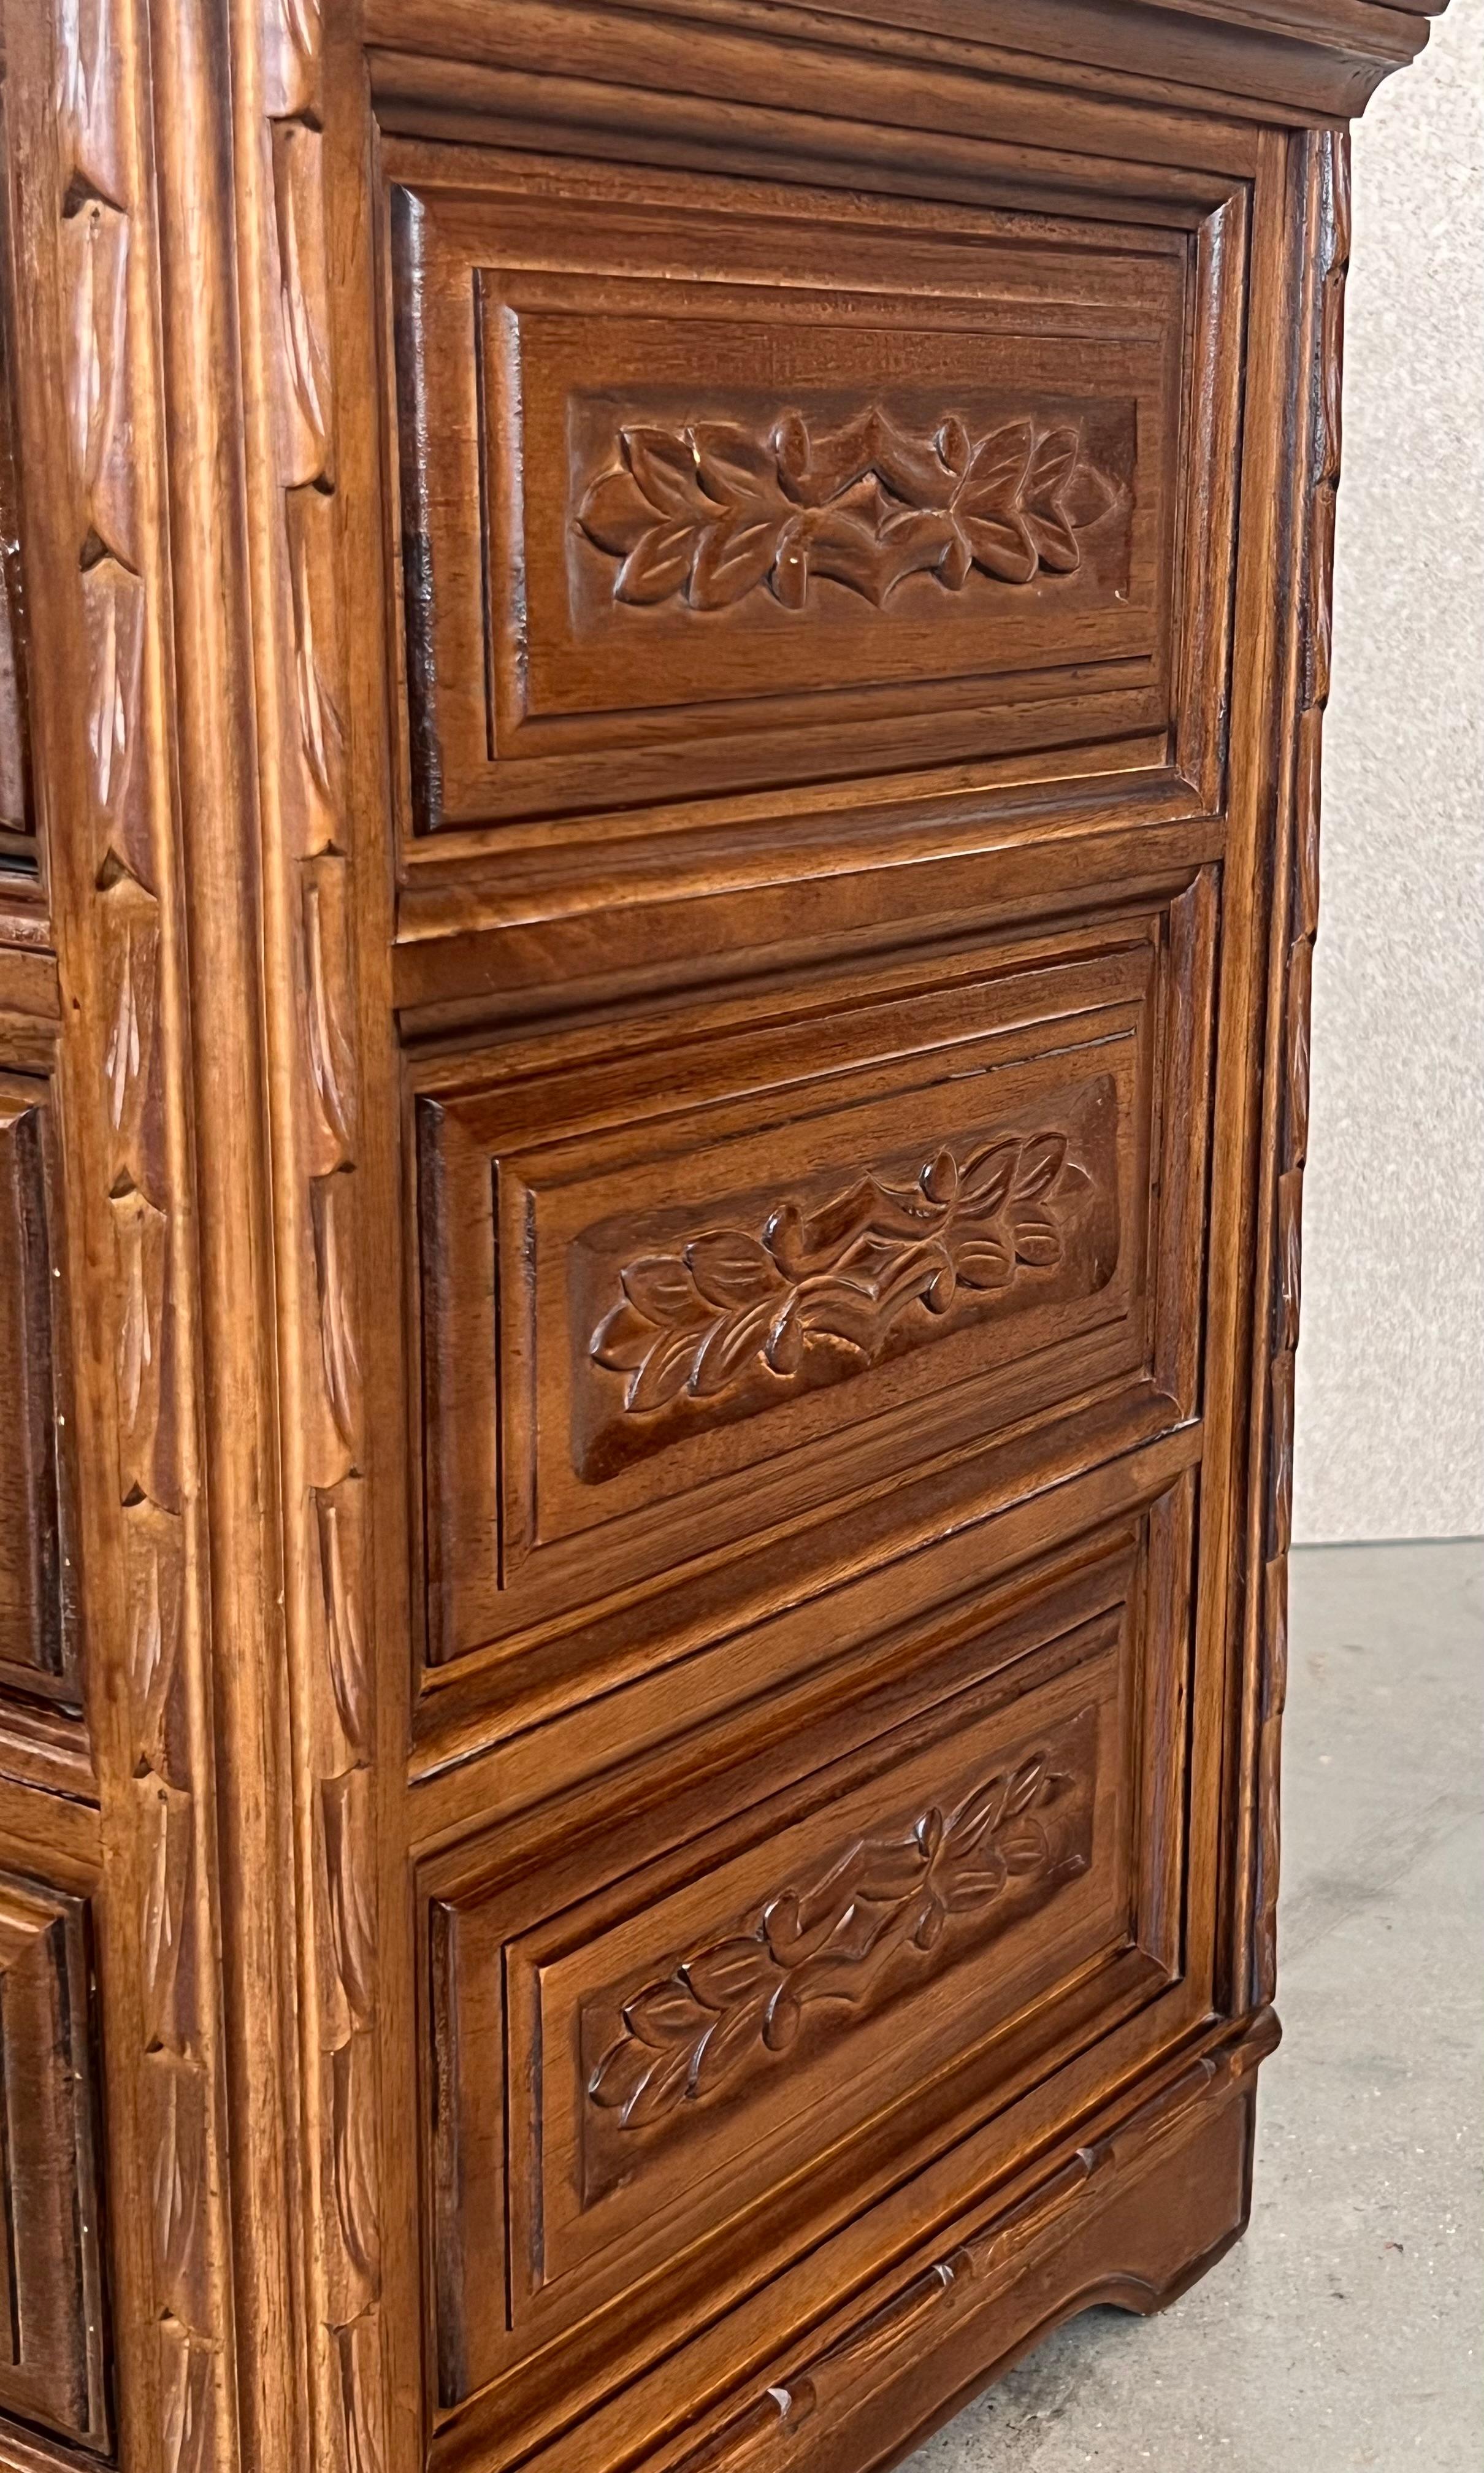 20th Catalan Spanish Baroque Carved Walnut Tuscan Chest of Drawers or Nightstand For Sale 1